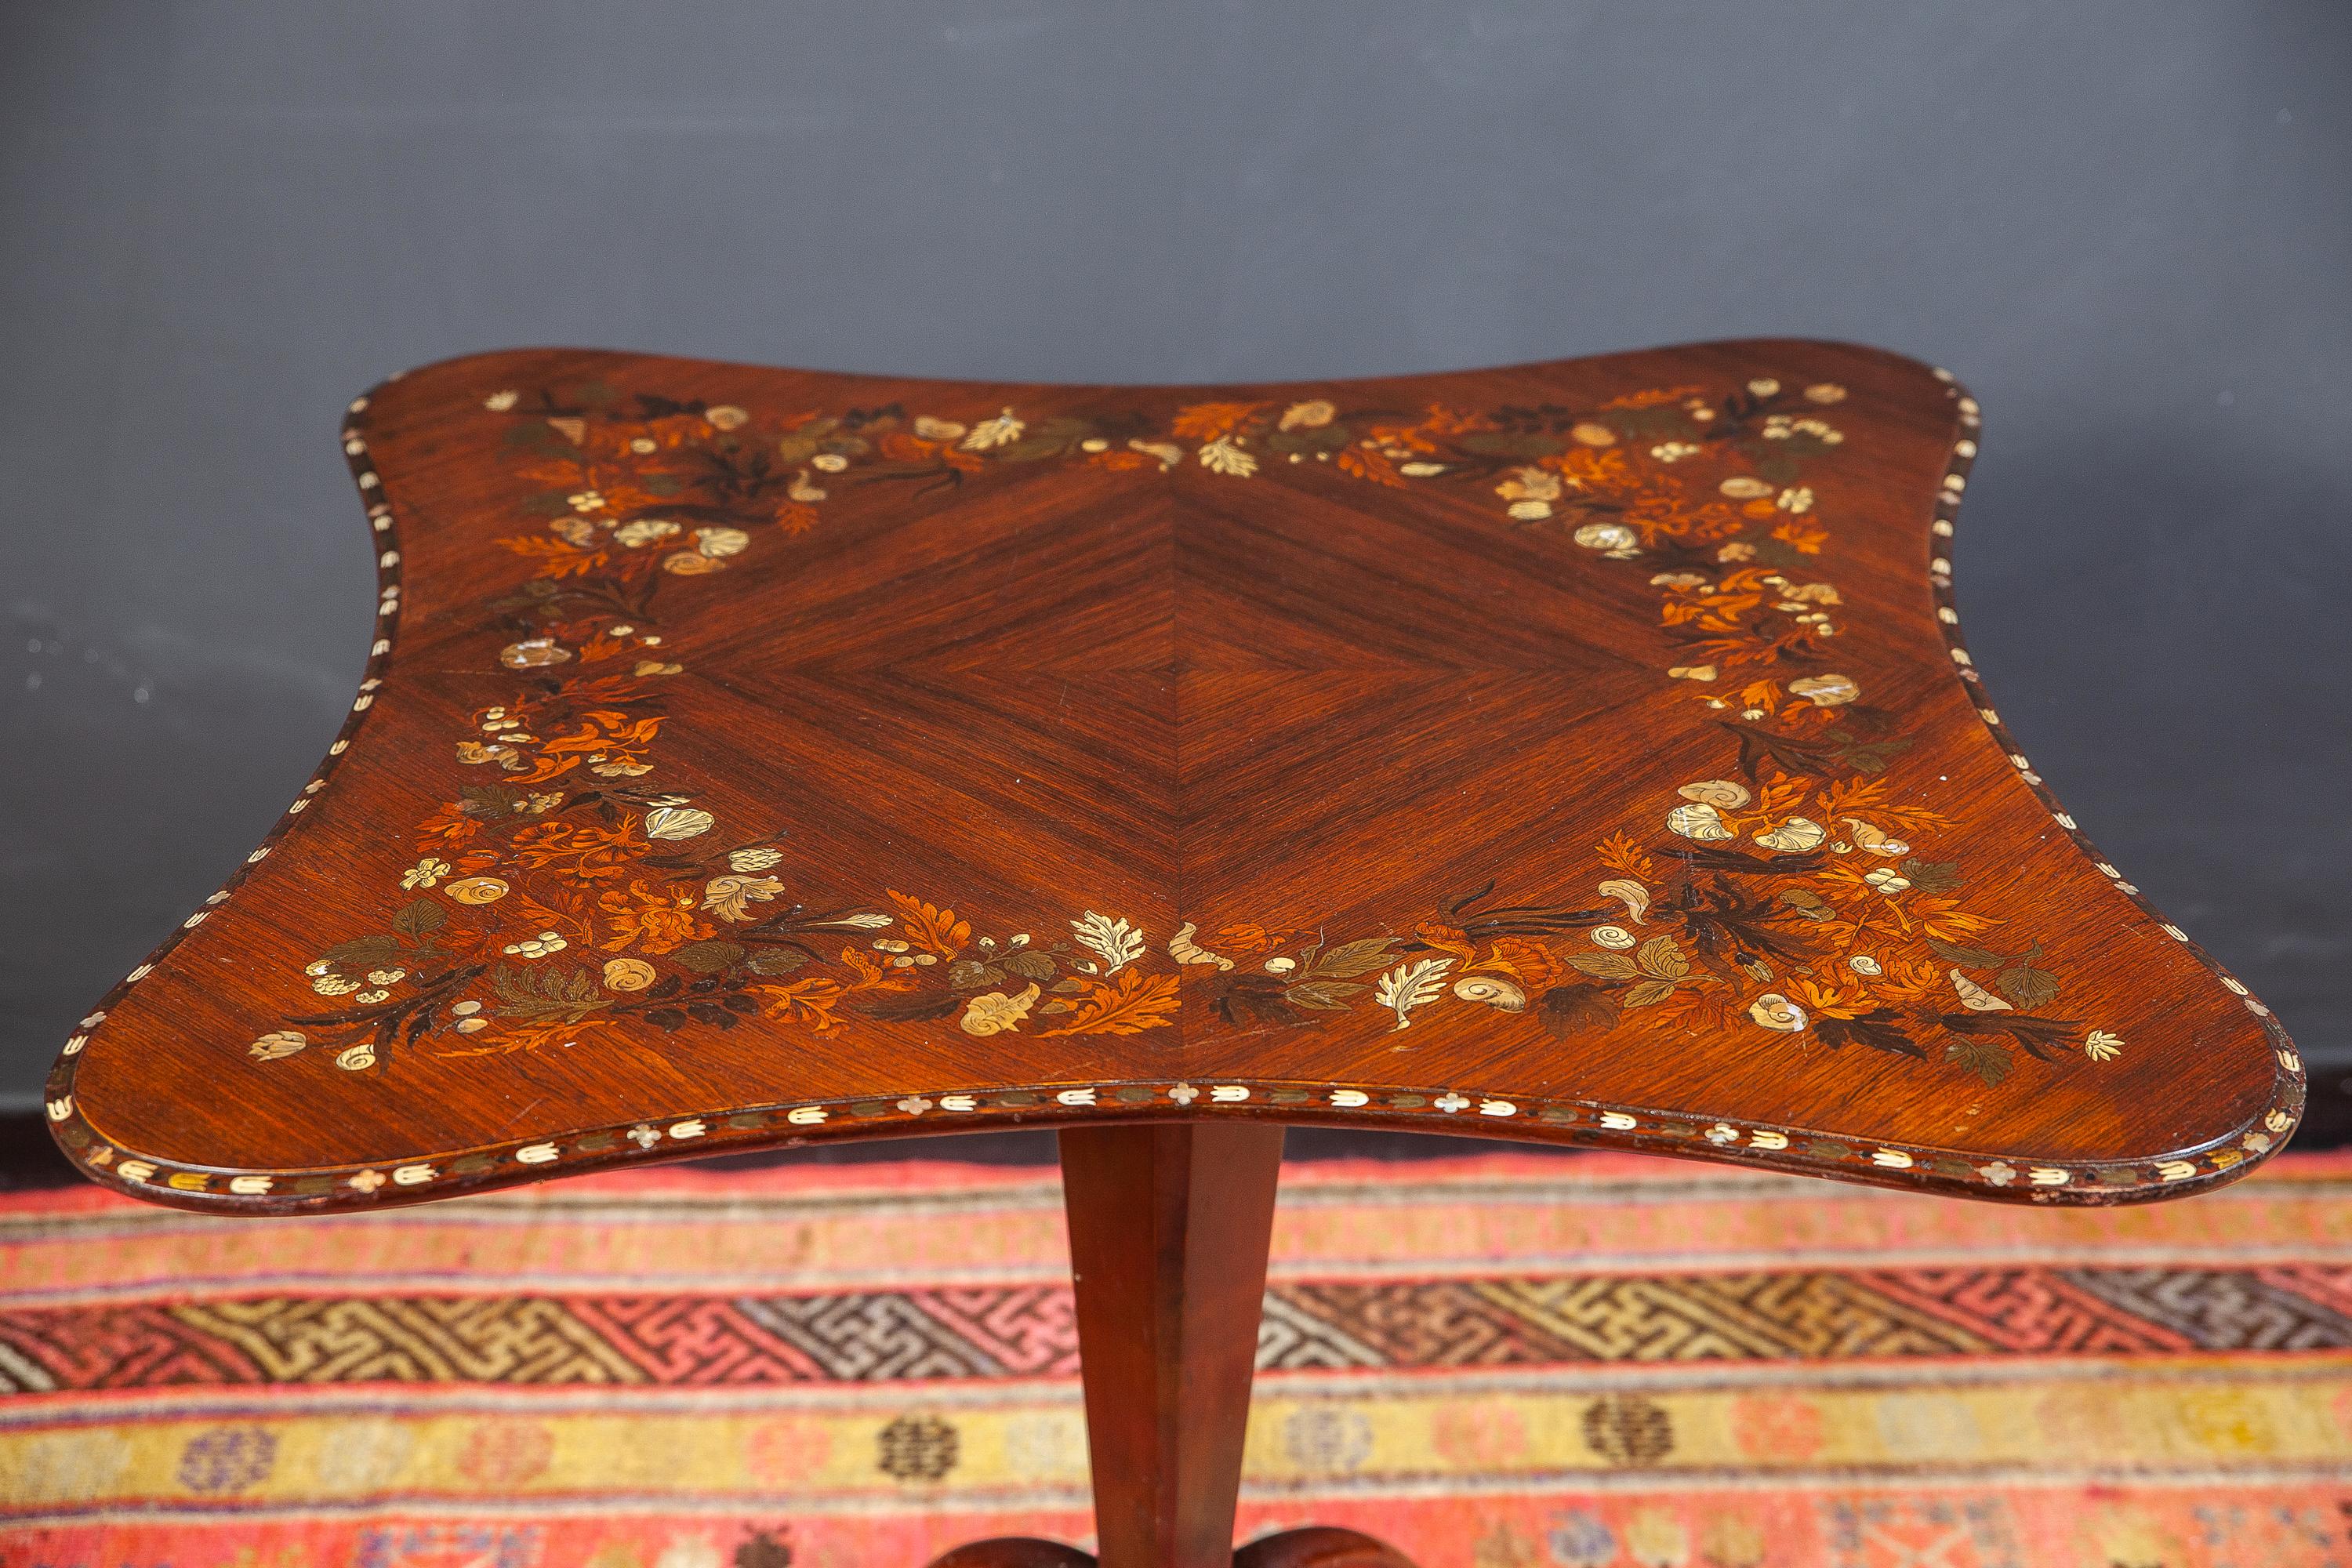 Elegant English Regency marquetry inlaid center table or occasional table with mahogany tripod base.
The tabletop with high quality inlaid decoration with various precious selected woods and 